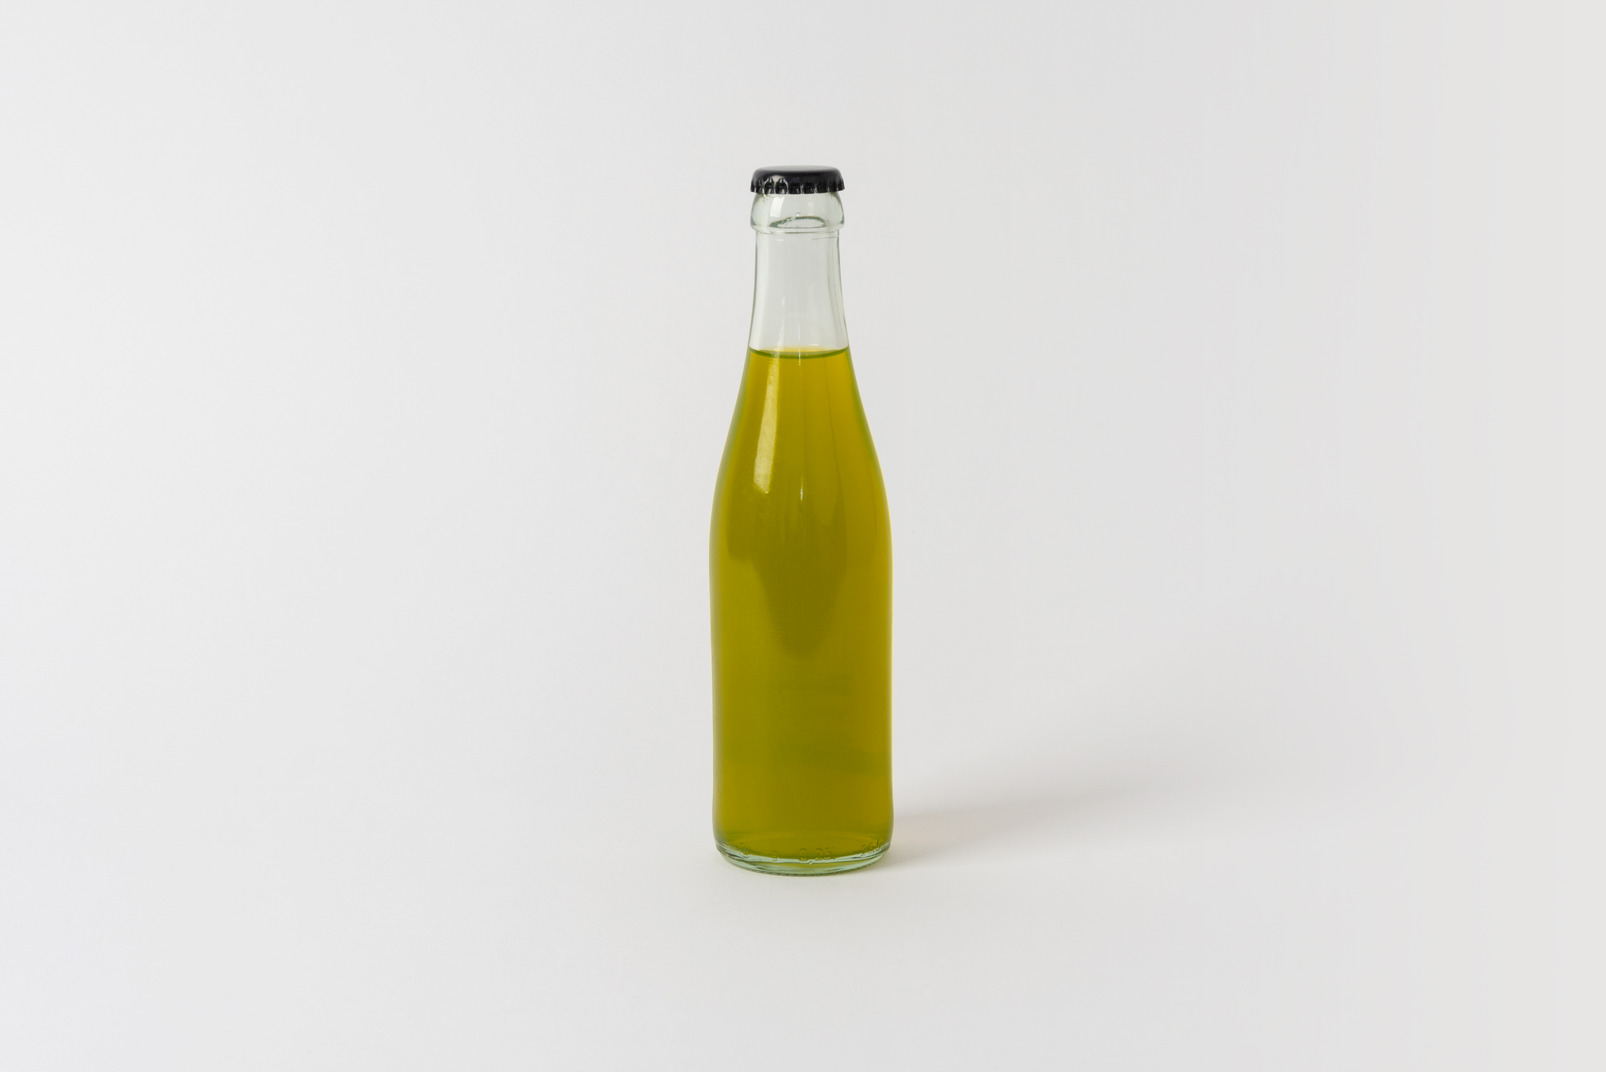 Glass bottle with some soft drink